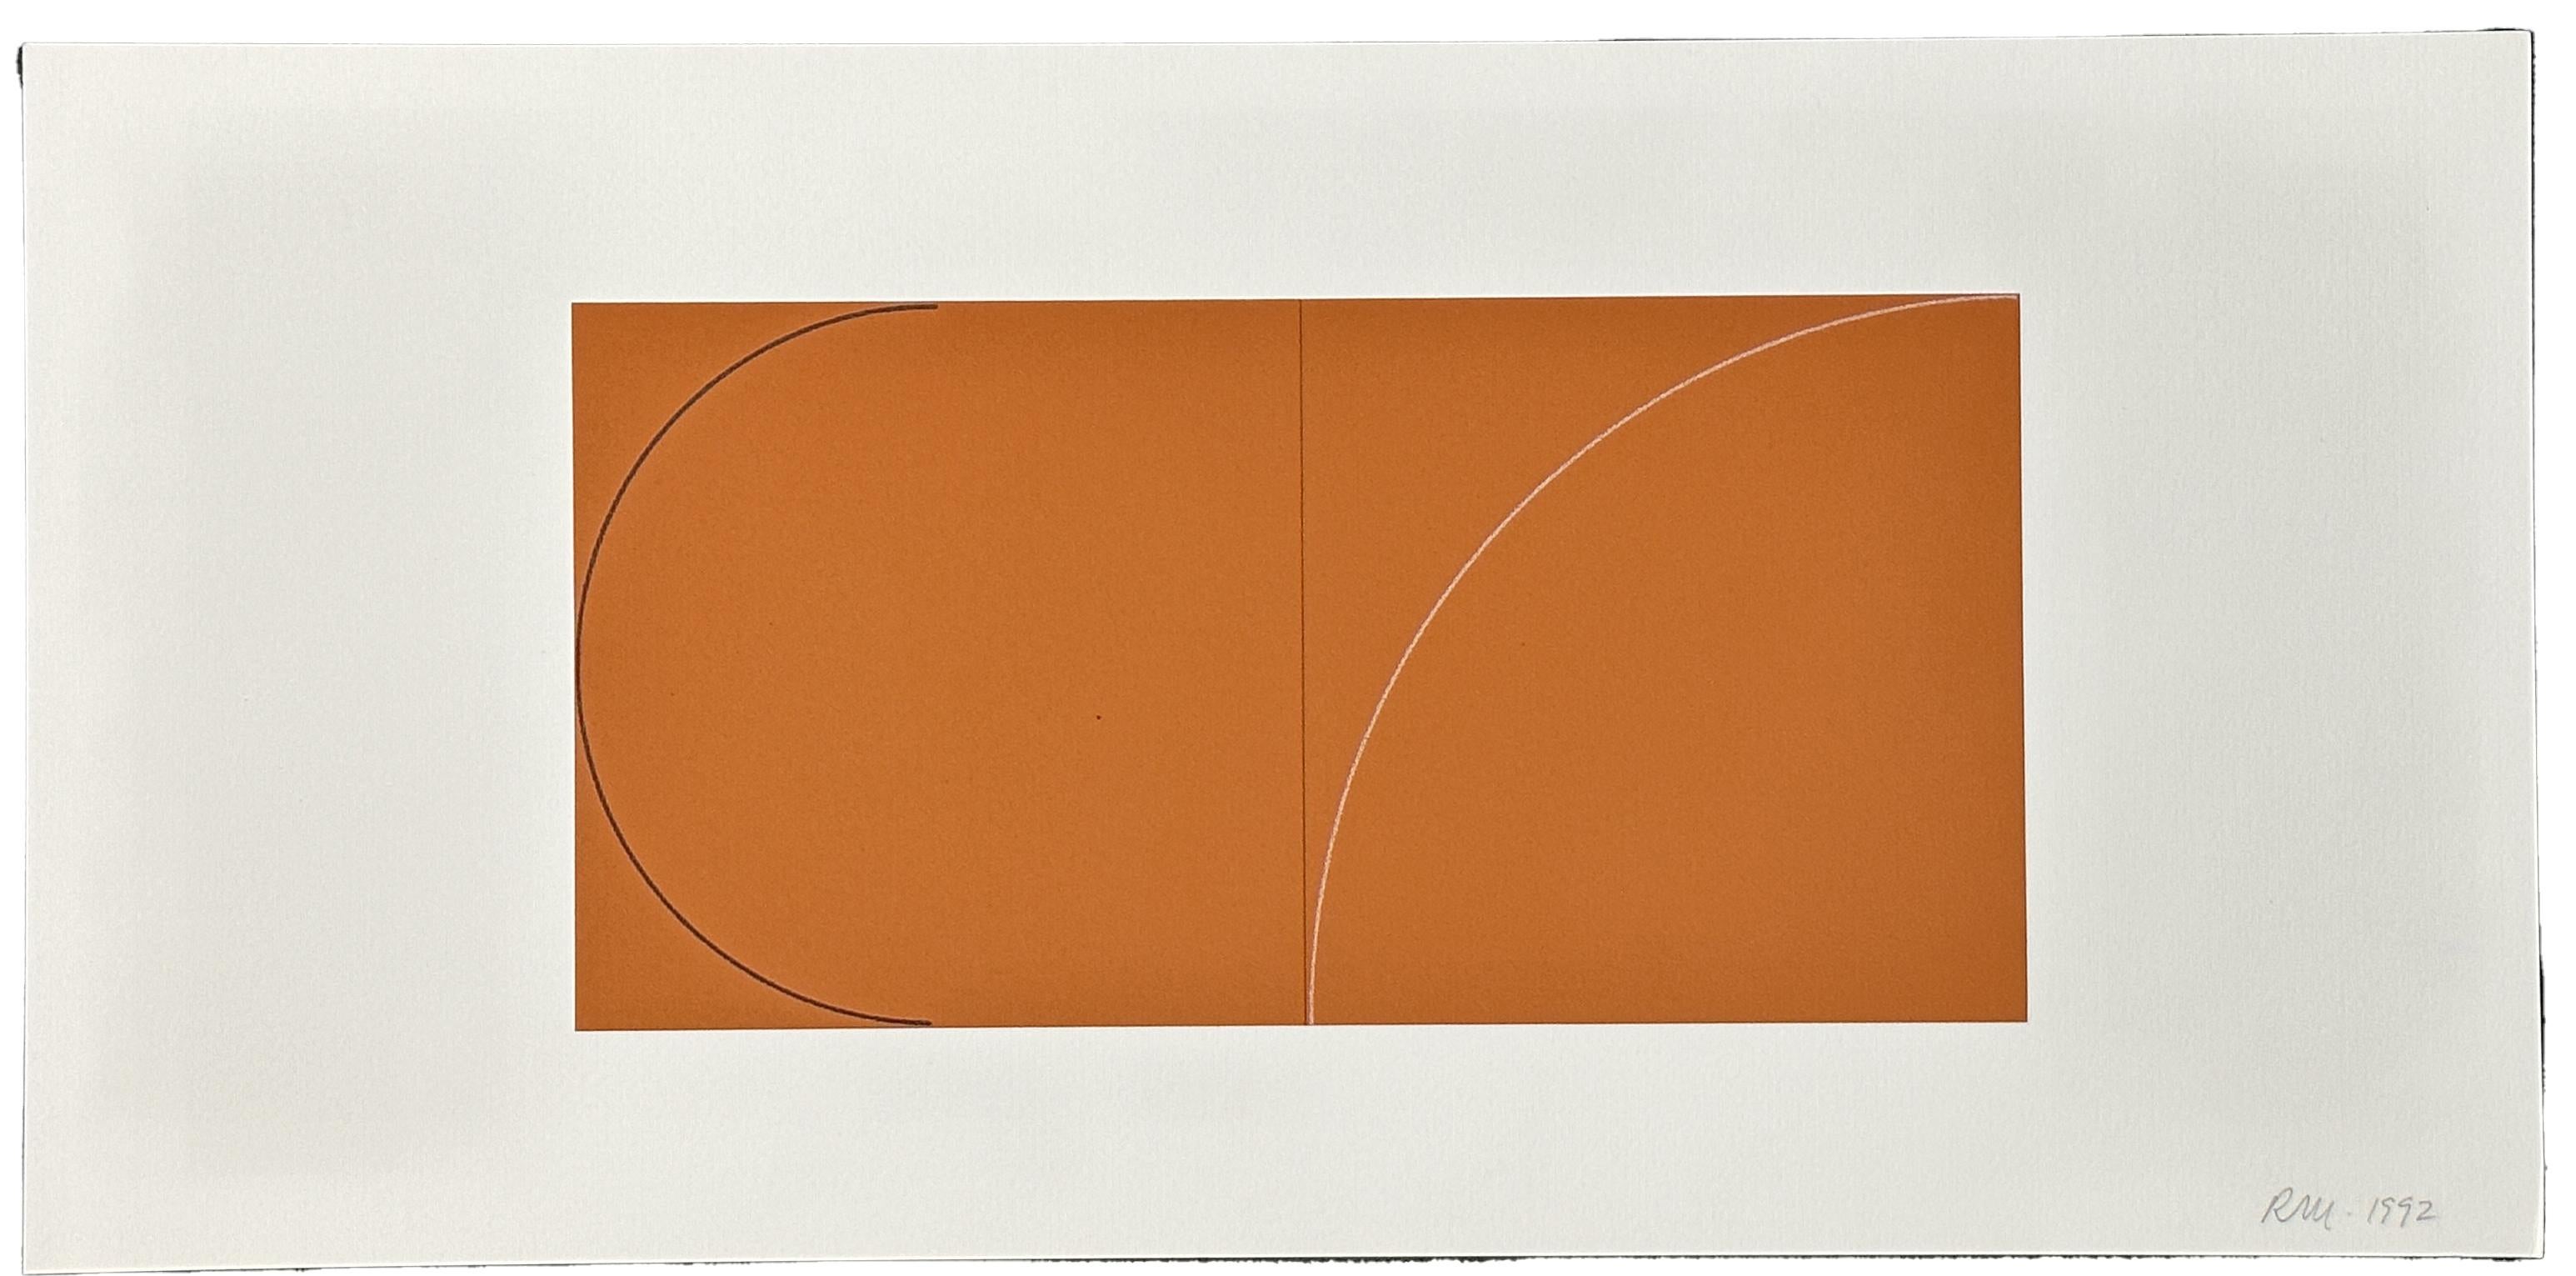 Panel Paintings, 1973-1976 A book of screen prints 1992 - Abstract Geometric Print by Robert Mangold